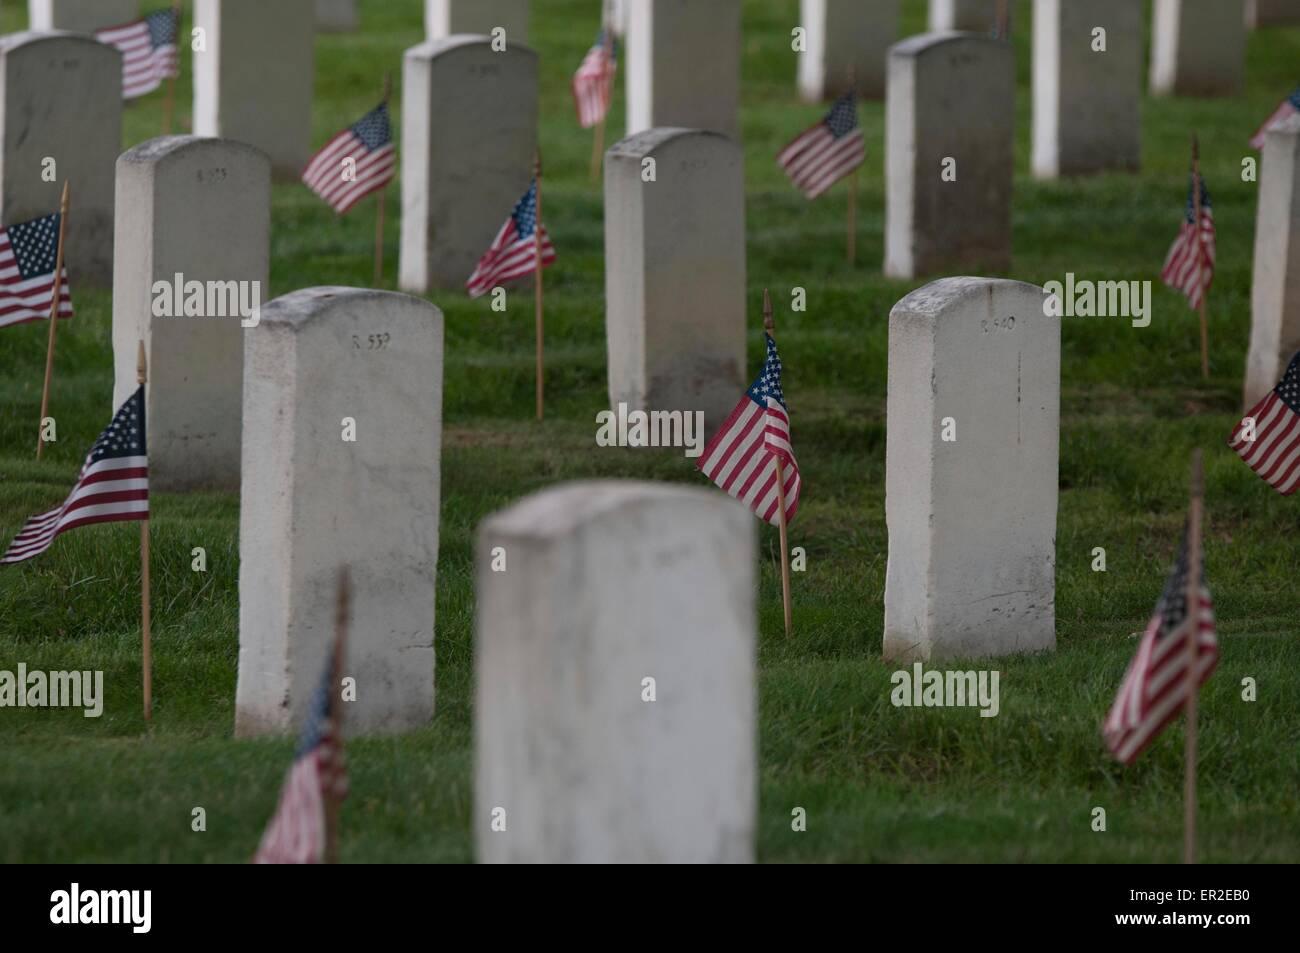 U.S flags in front of grave sites in honor of Memorial Day at Arlington National Cemetery May 21, 2015 in Arlington, Virginia. The Old Guard has conducted Flags-in, when an American flag is placed at every headstone, since 1948. Stock Photo